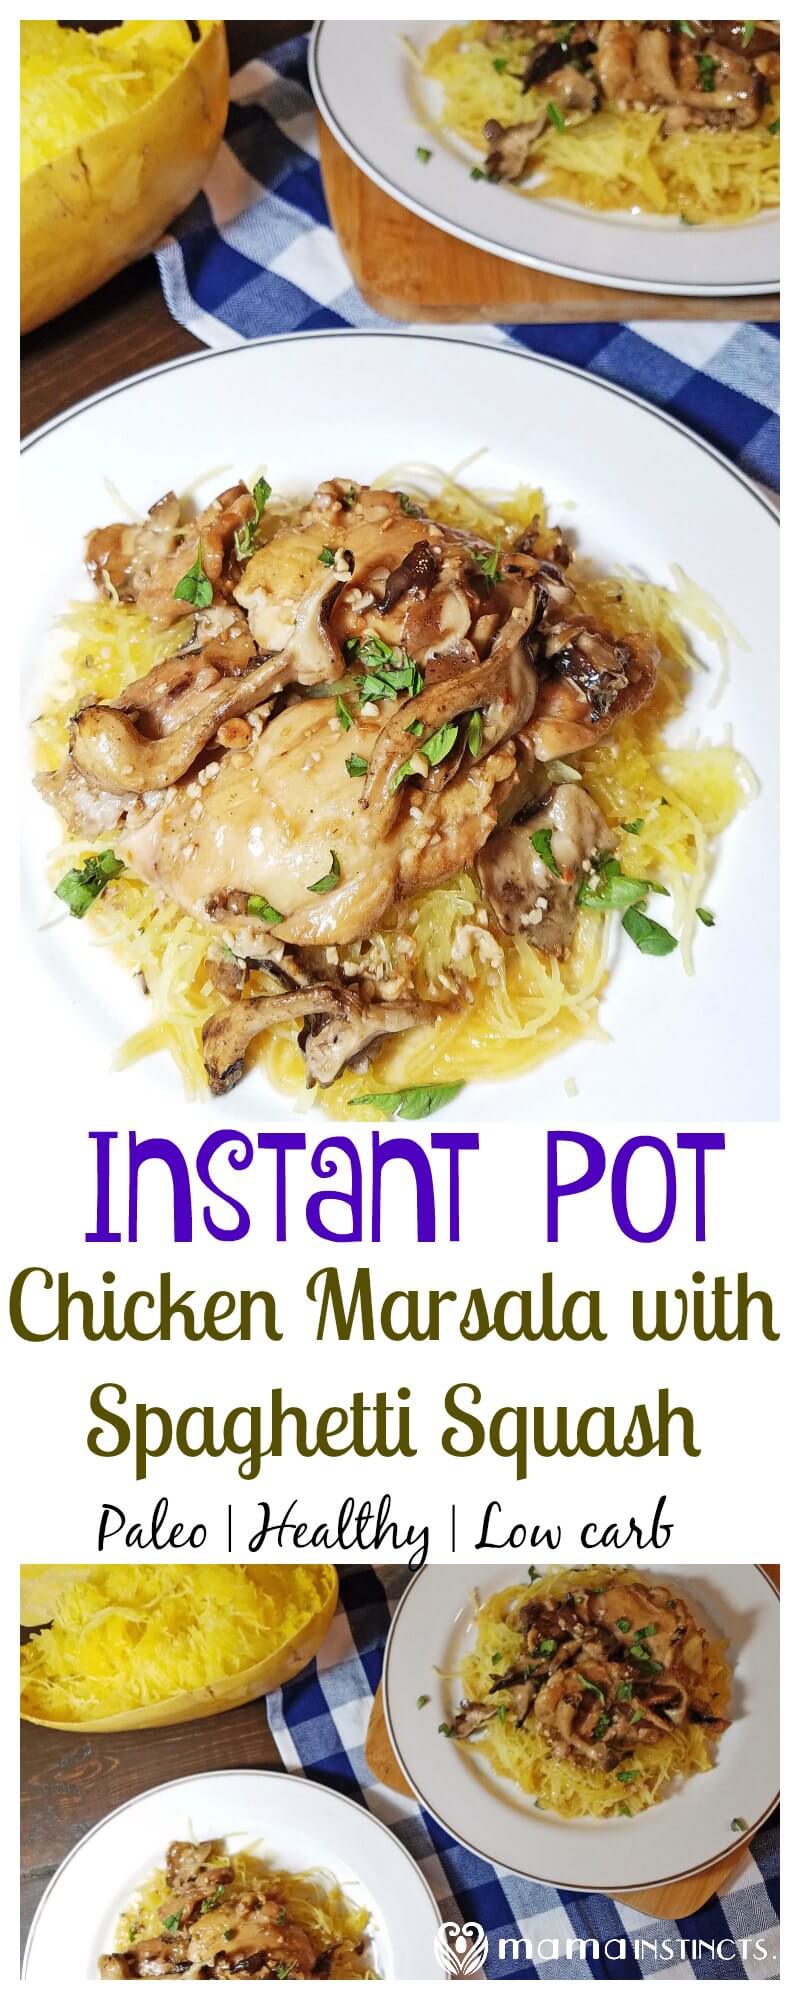 Try this tasty Chicken Marsala with Spaghetti Squash recipe that is ready in under 30 minutes using an Instant Pot. It's paleo, healthy, low carb and a meal the entire family will love.